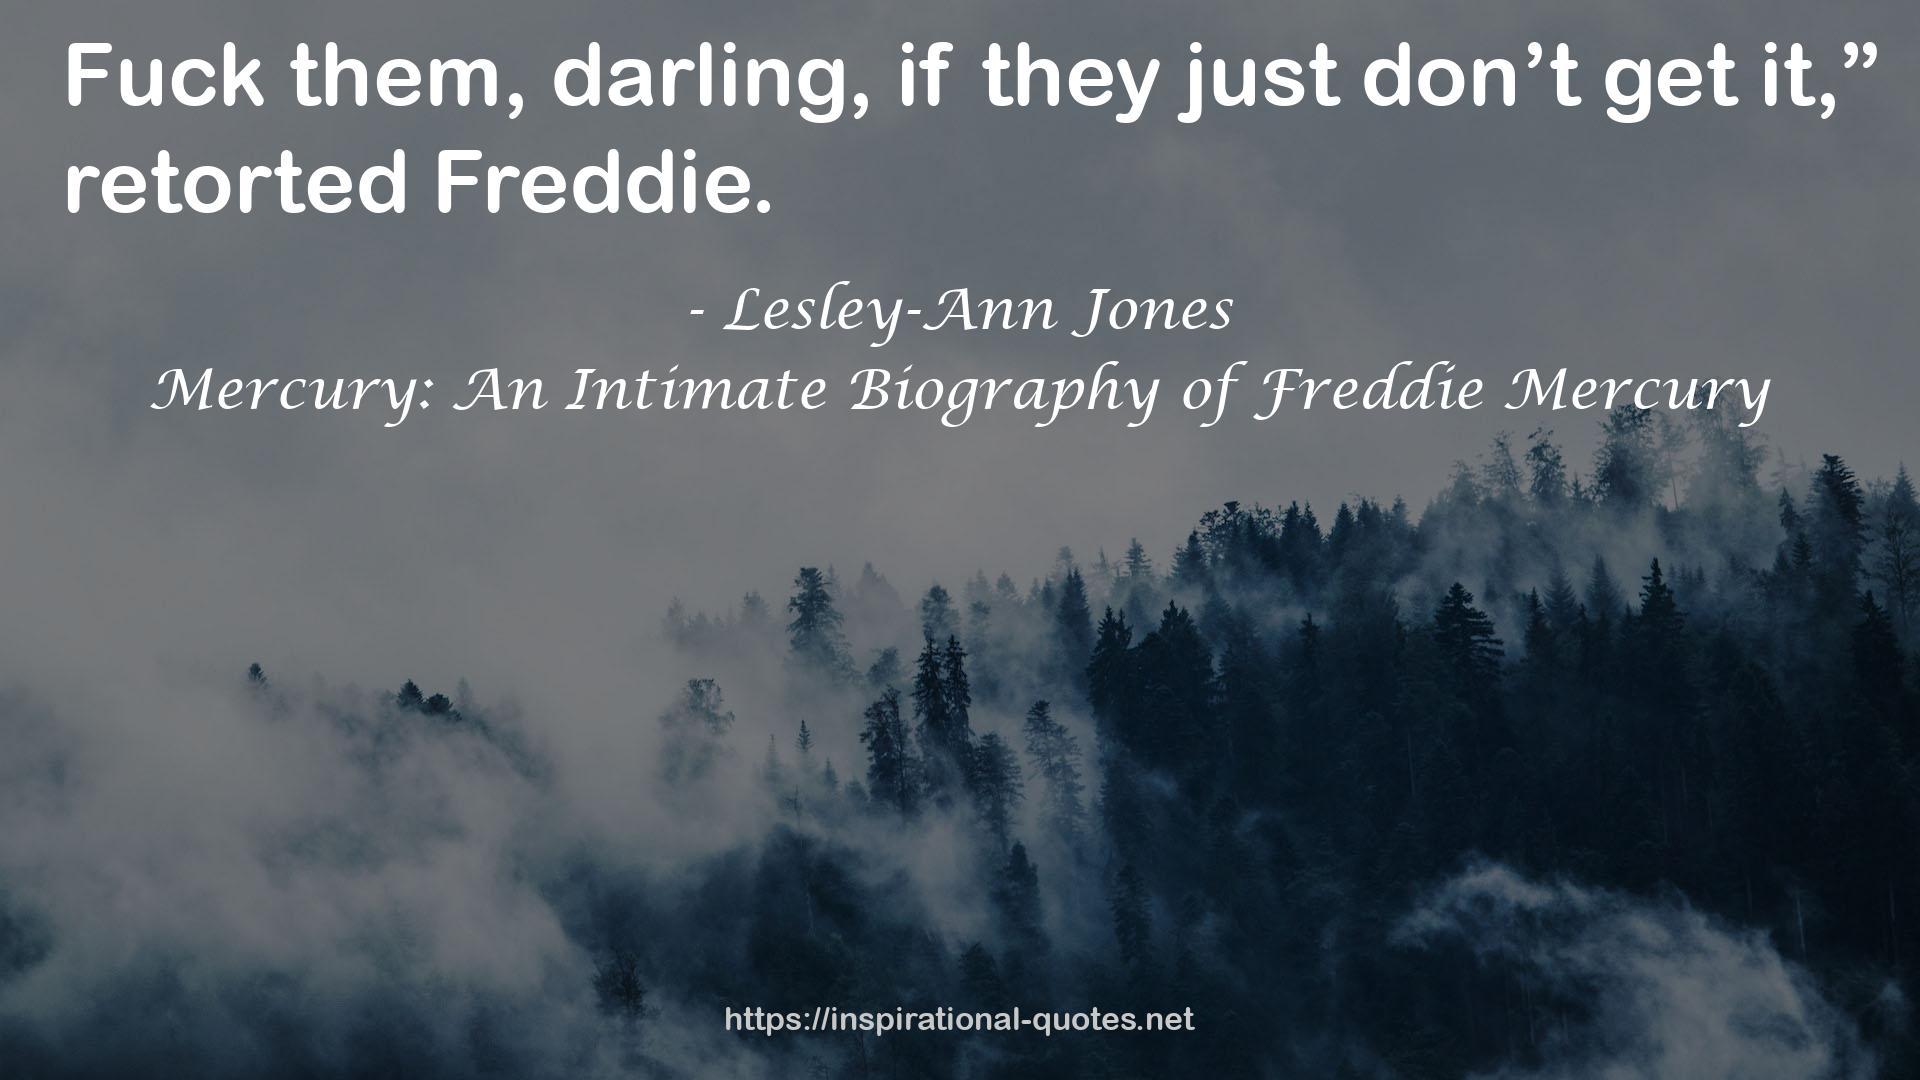 Mercury: An Intimate Biography of Freddie Mercury QUOTES